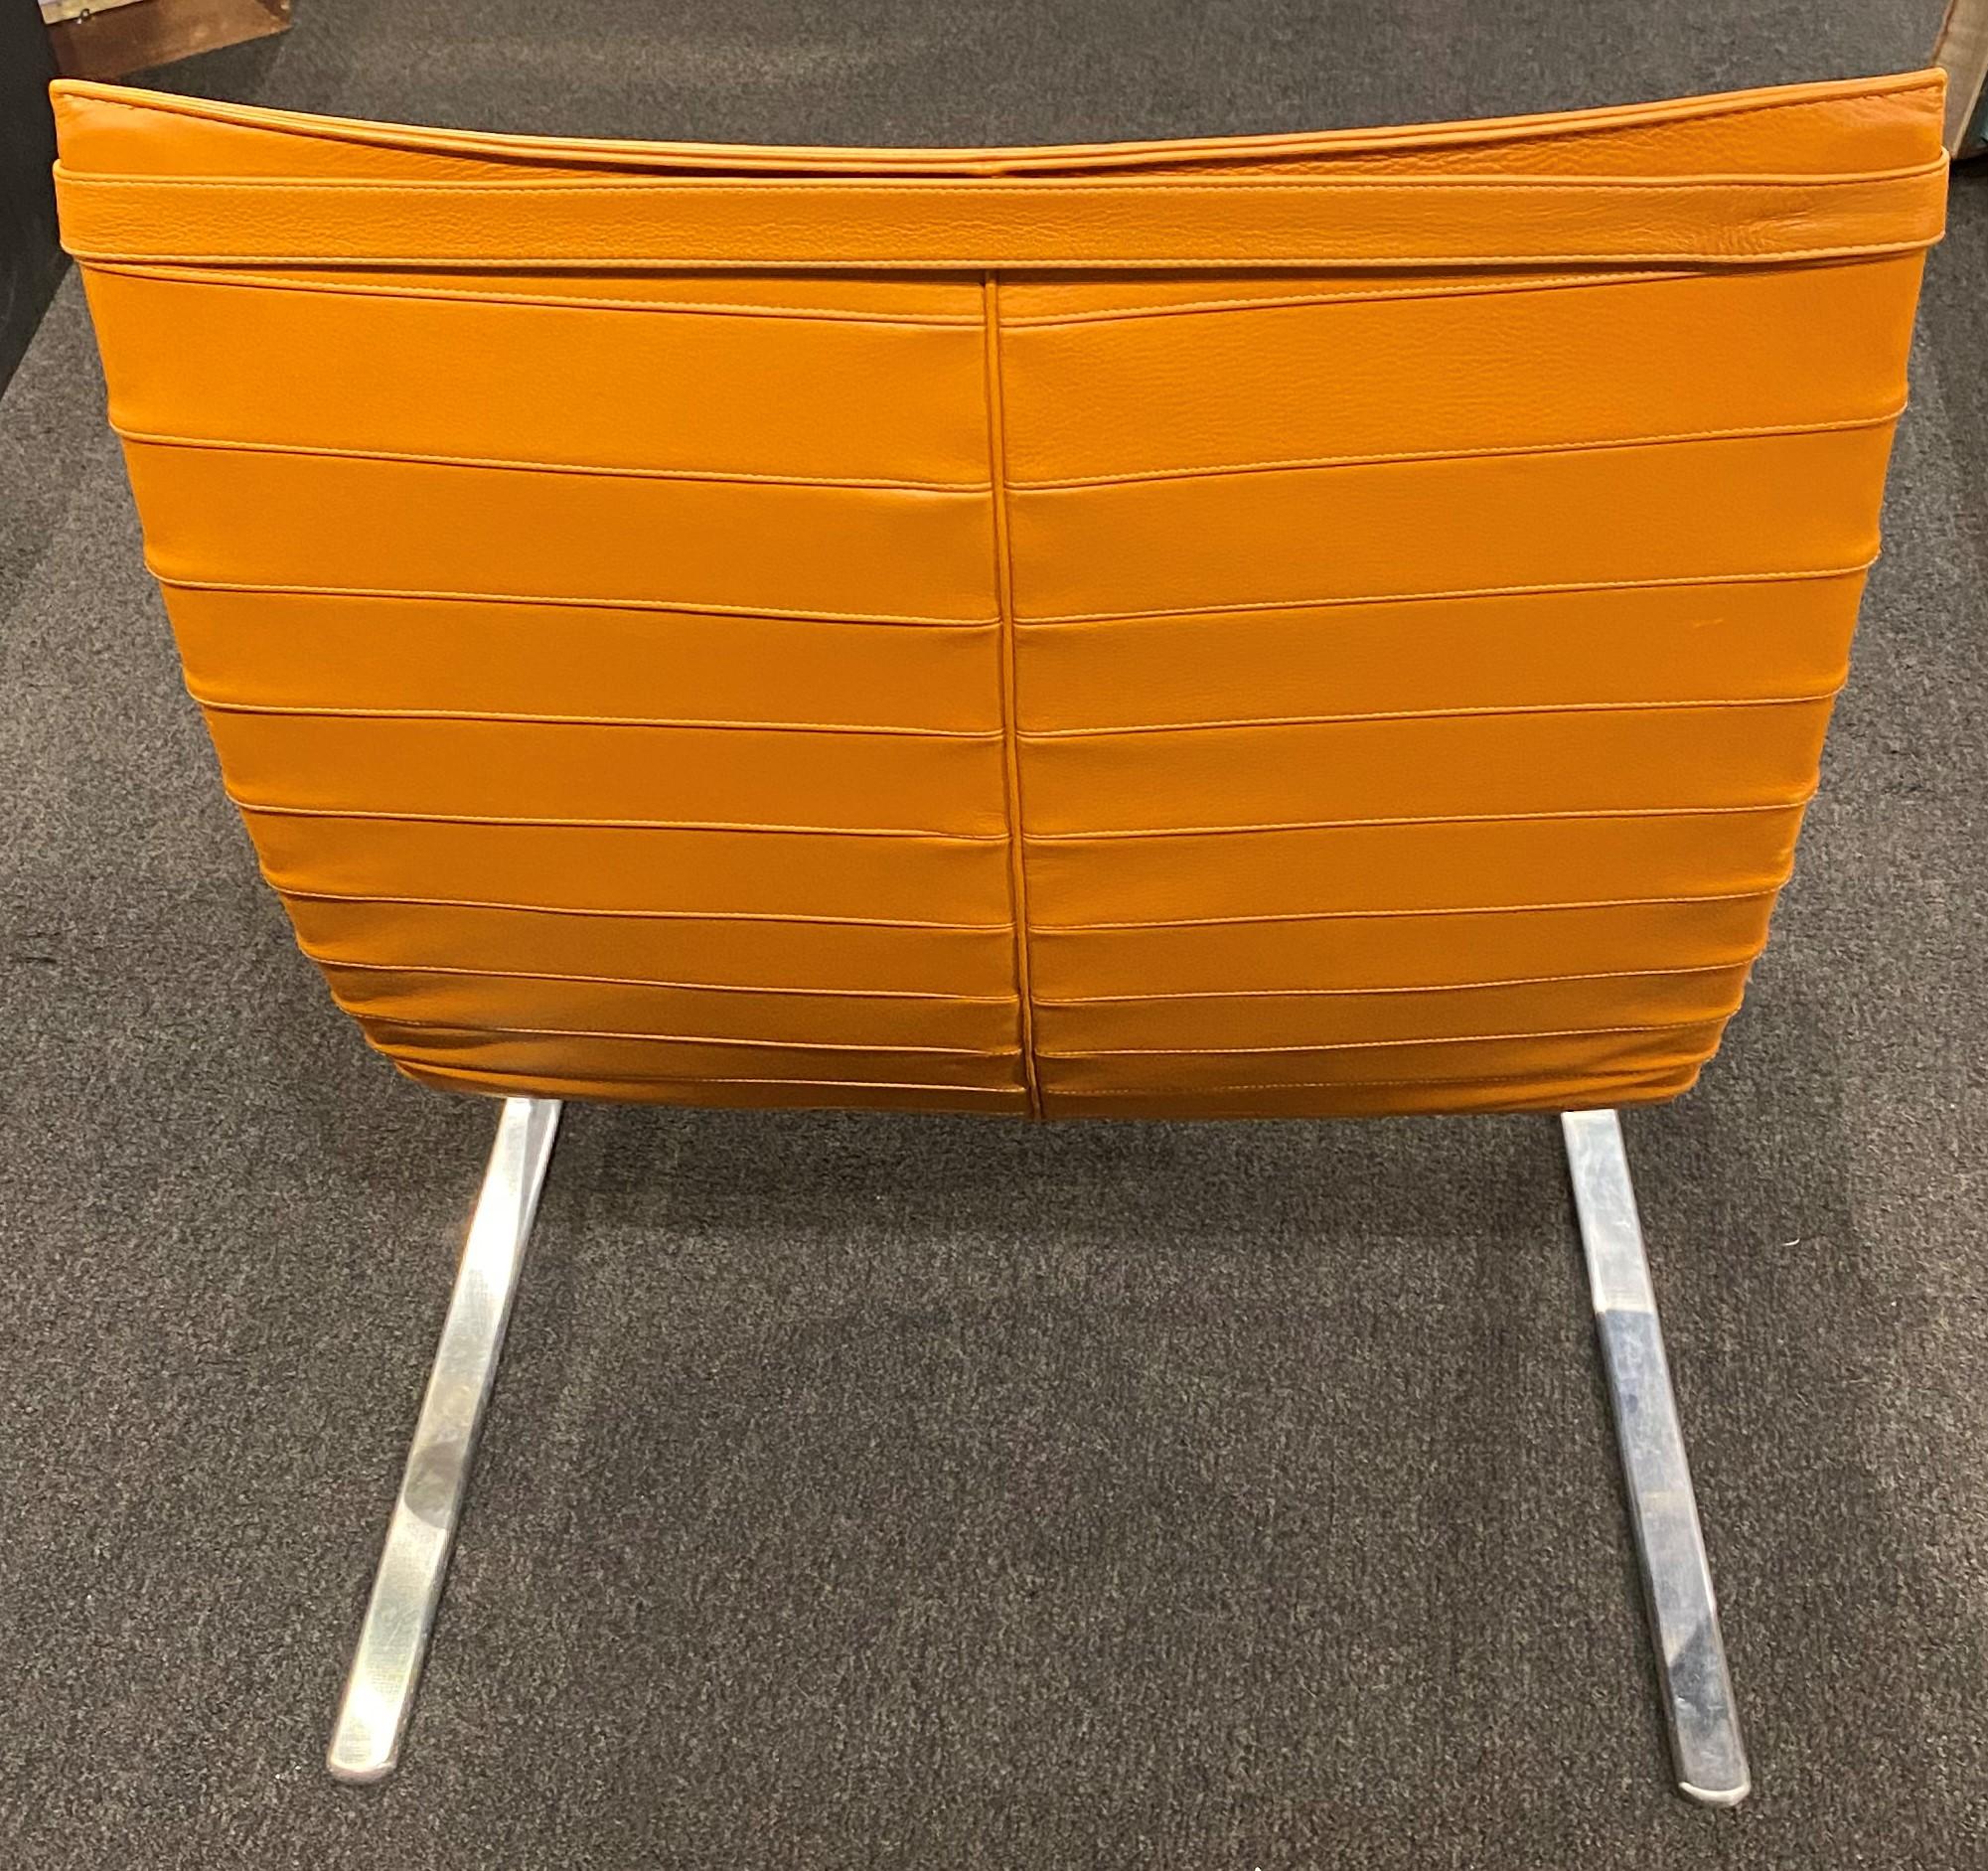 Danish Mid Century Modern Style PK20 Chair by Poul Kjaerholm for Fritz Hansen In Good Condition For Sale In Milford, NH